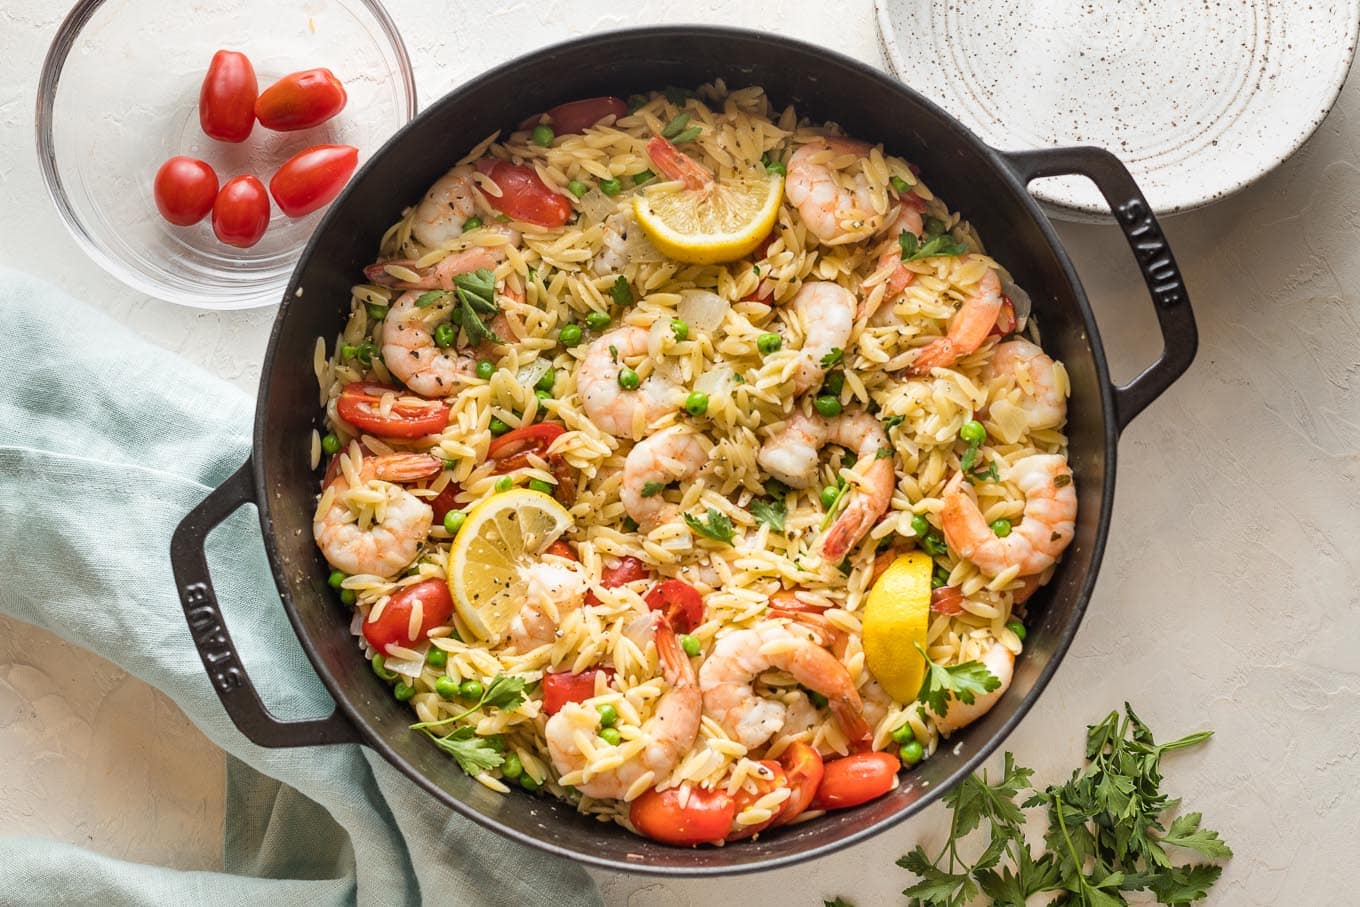 Finished skillet with shrimp and lemon wedges and herbs added back to orzo in skillet.